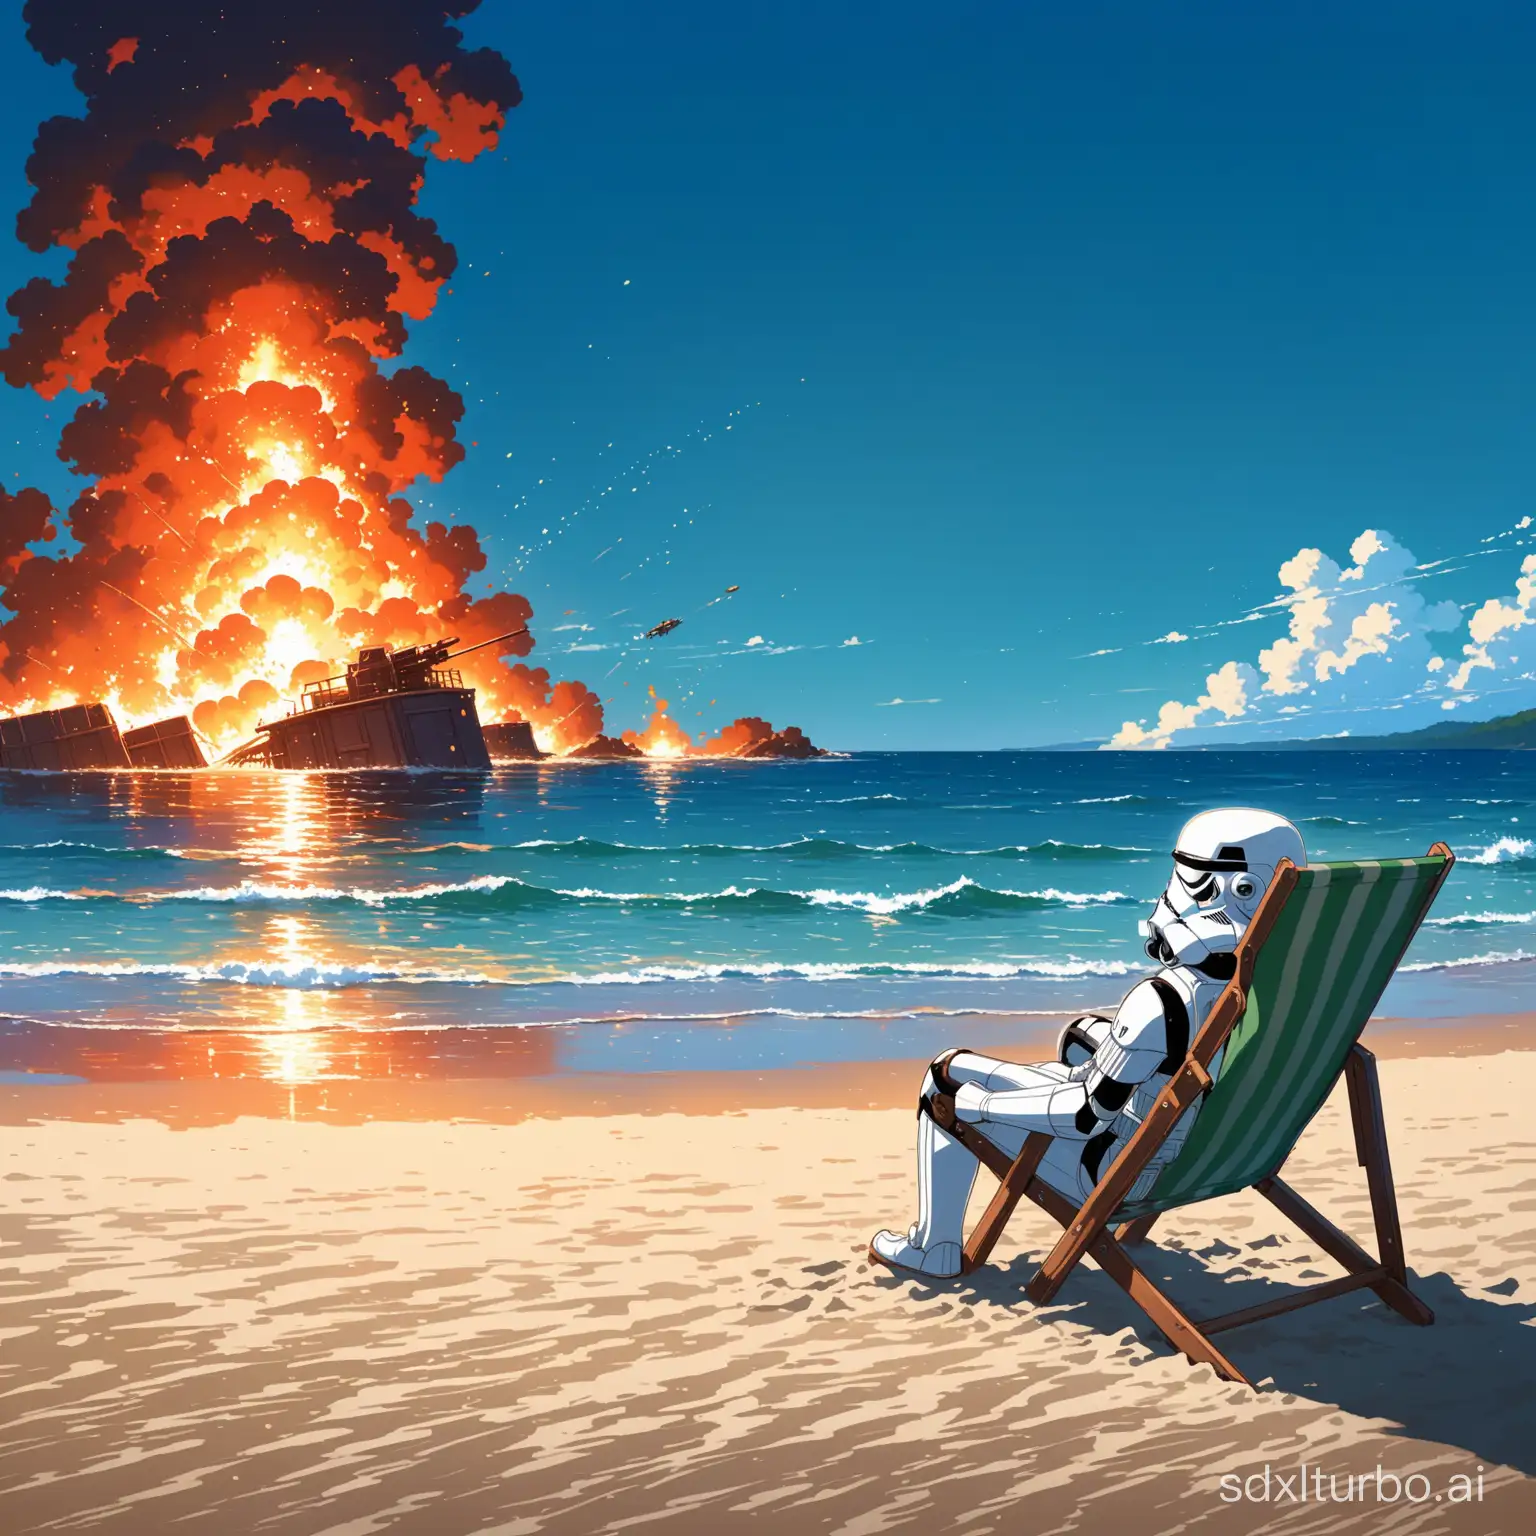 Drawing with great detail in textures and brightness. Anime, Your name, Makoto Shinkai. men with stormtrooper helmet in the beach of French postwar period, watching the sea, burning metal elements falling into the sea, no shirt, red crab carrying a stormtrooper helmet in its claws, sand and sea, meaddle shot, monet style, portait shot, beach chair. Detail of skin texture, bokeh, contrasting and intense colors.